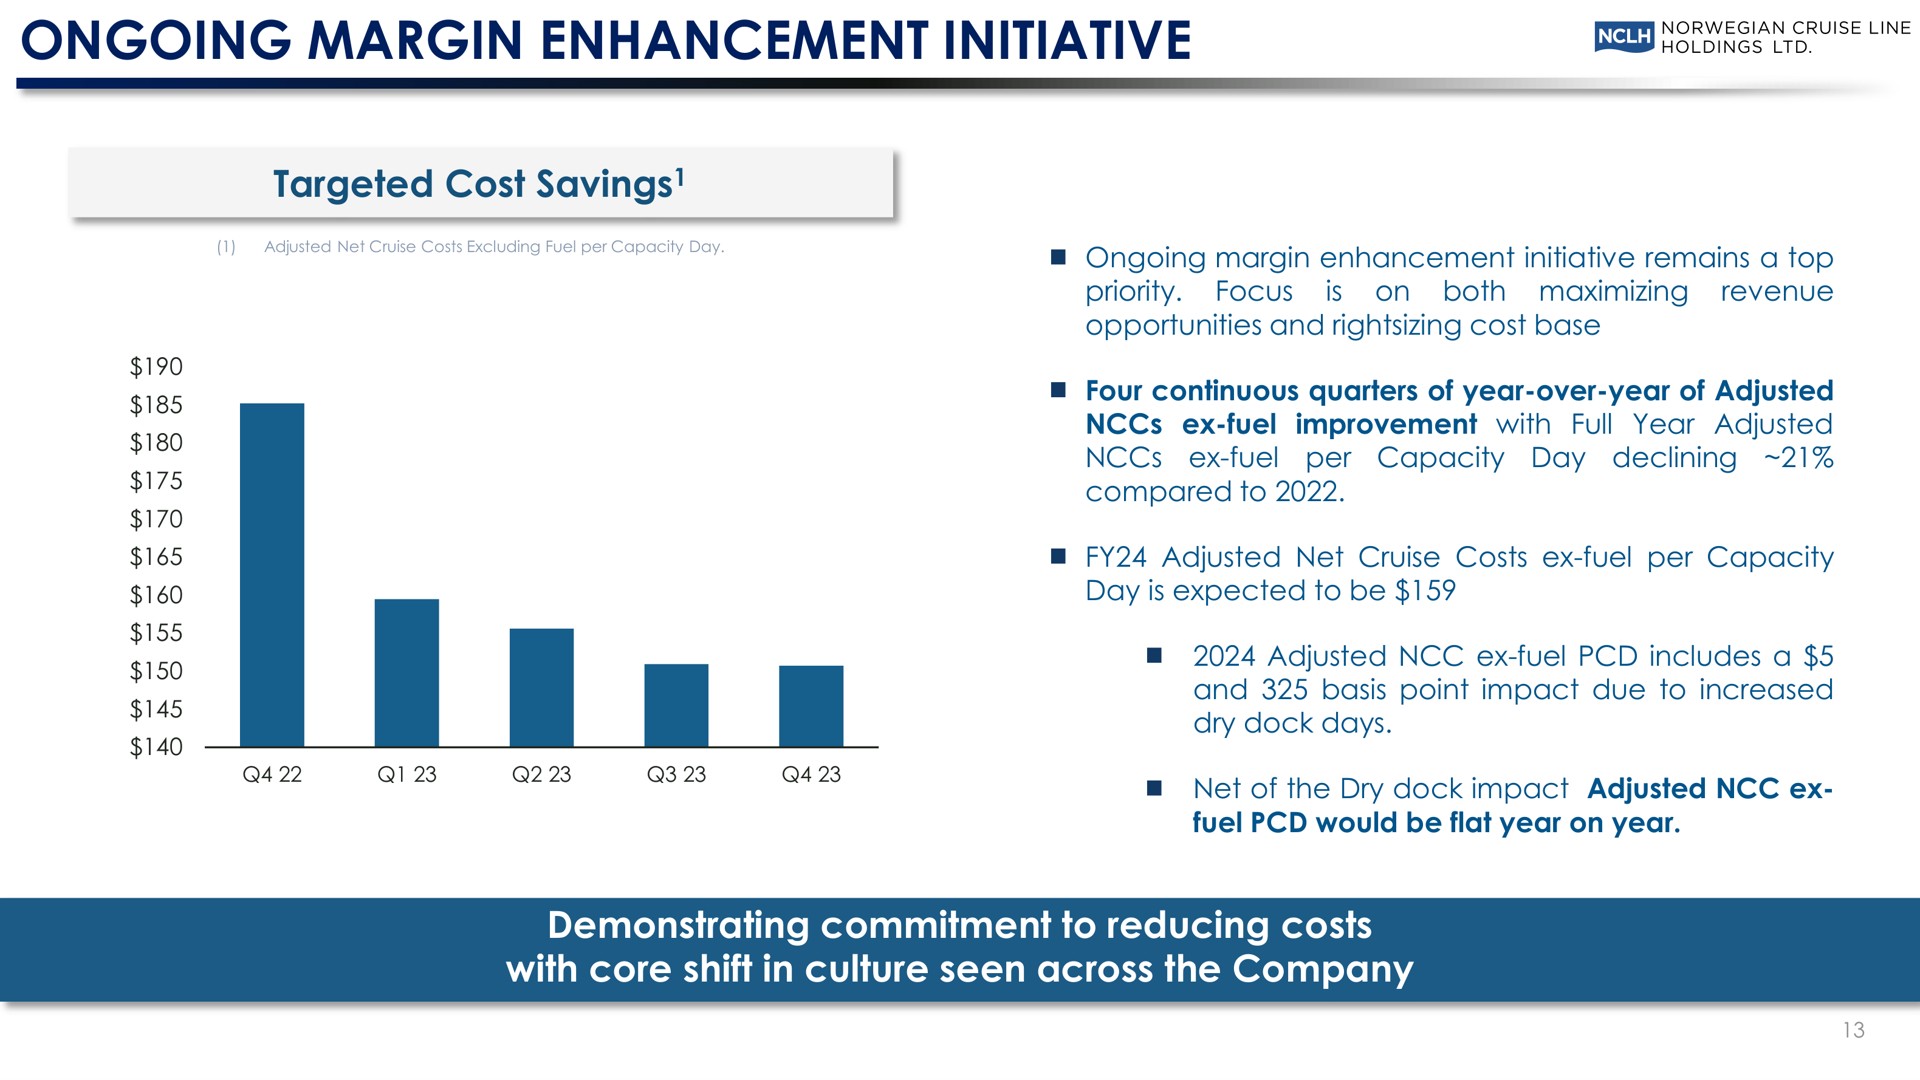 ongoing margin enhancement initiative targeted cost savings demonstrating commitment to reducing costs with core shift in culture seen across the company tad stones savings | Norwegian Cruise Line